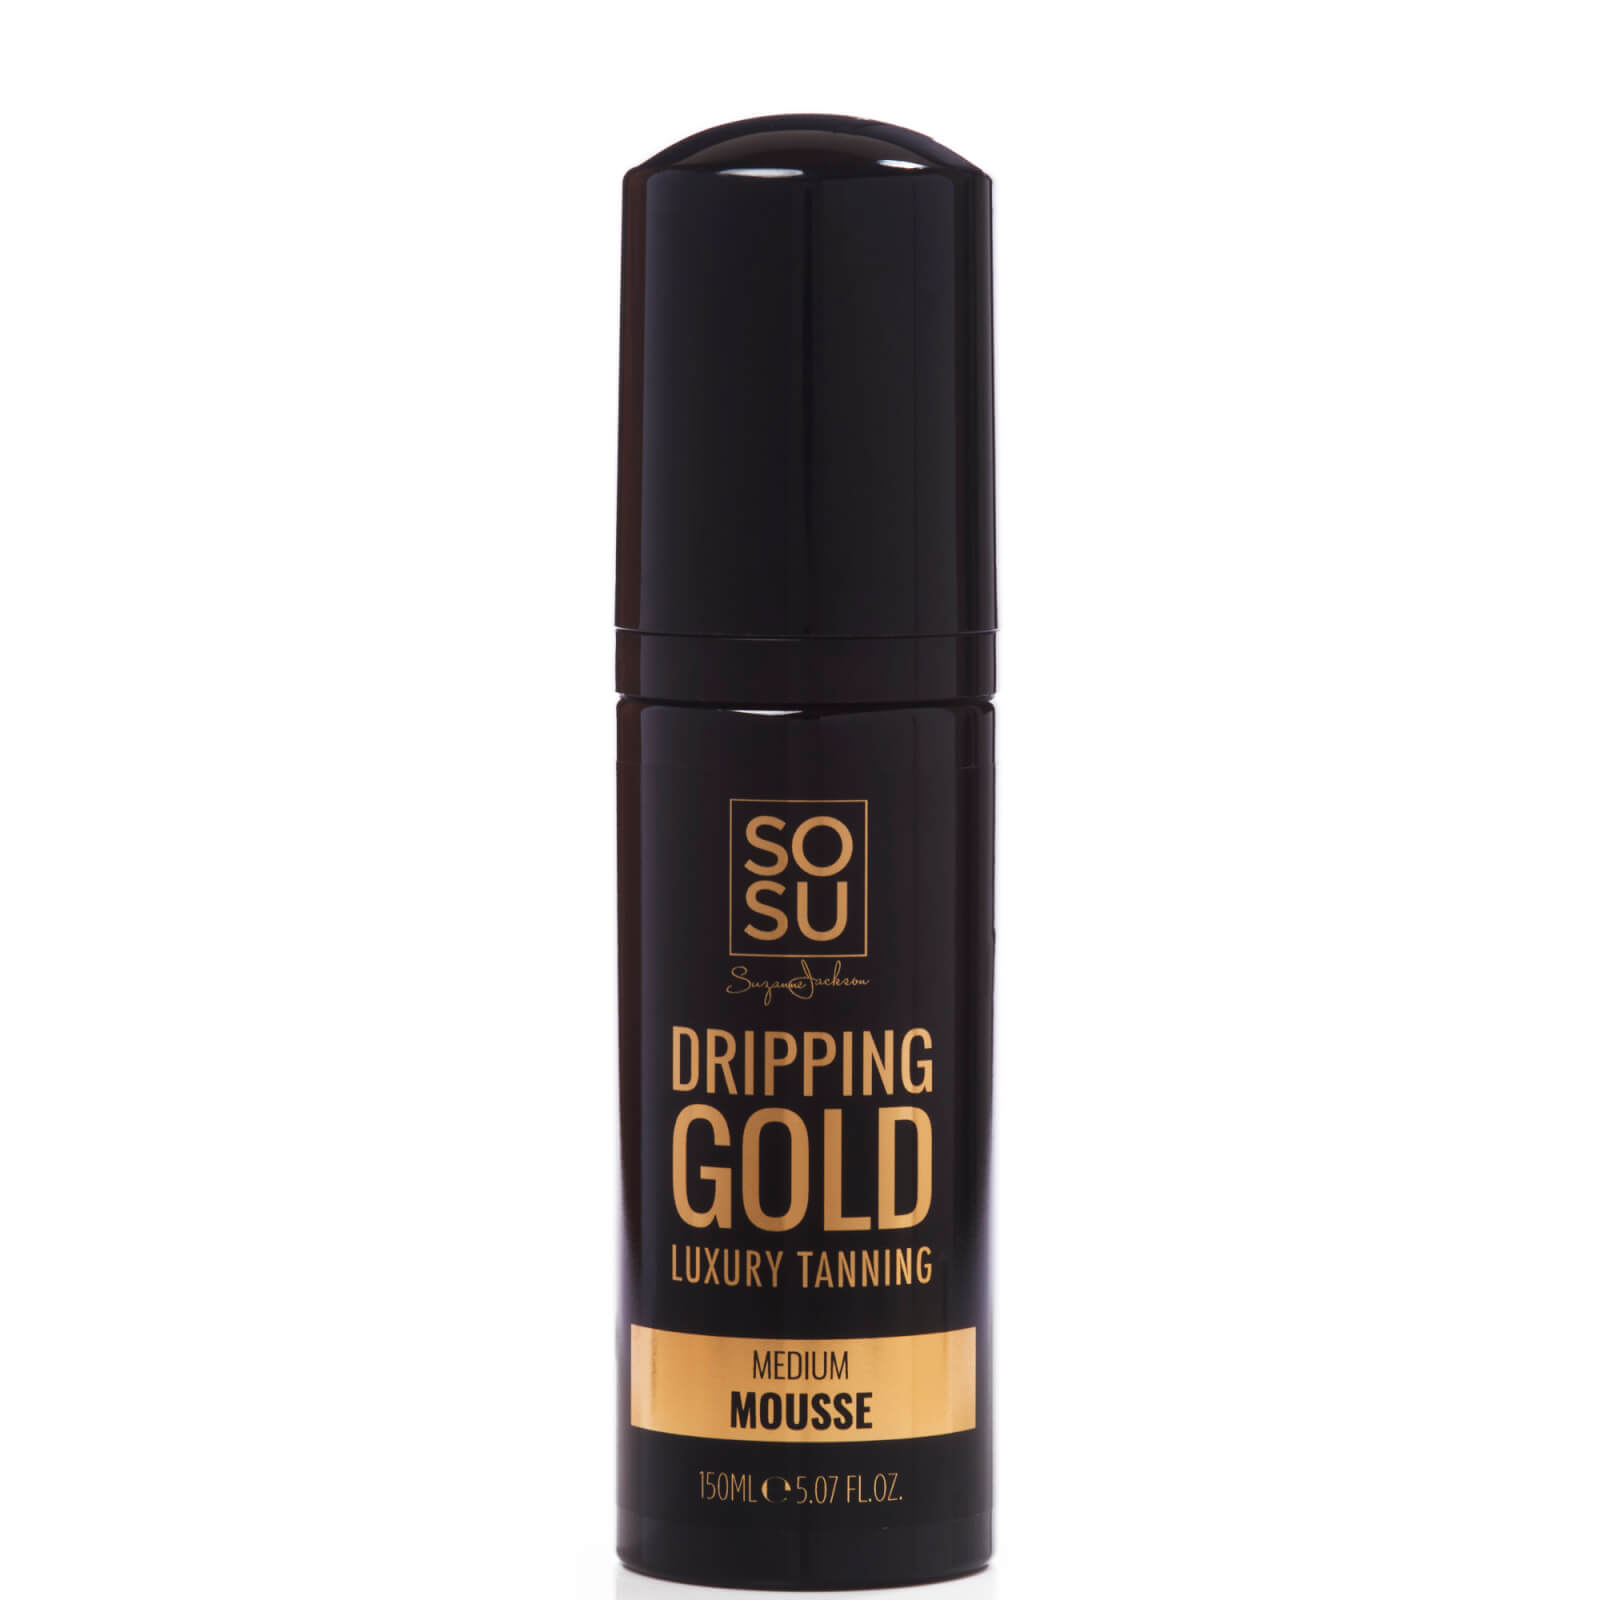 Dripping Gold Luxury Tanning Mousse (Various Shades) - Medium